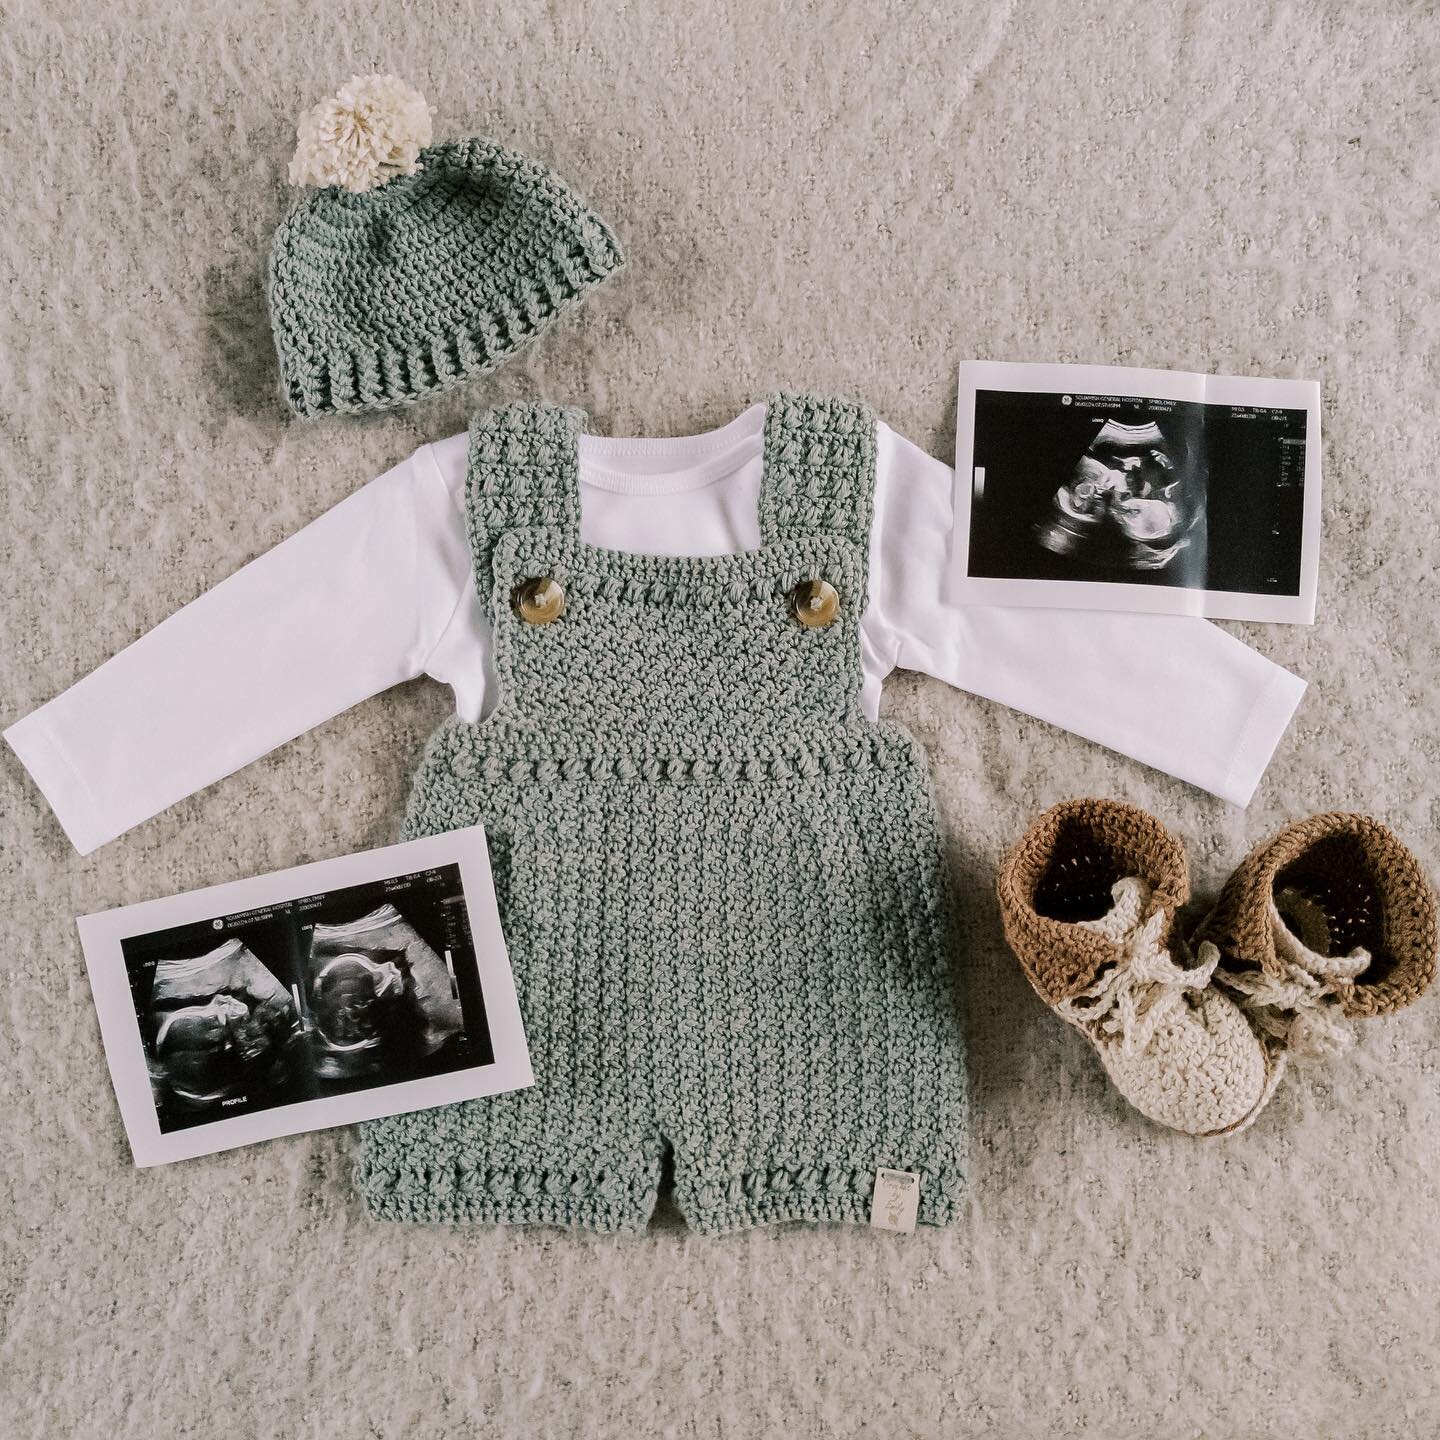 8 of the best years and adventures together, now here&rsquo;s to what will be our greatest, most challenging and most rewarding adventure yet&hellip;

Baby boy S coming June 2024 🩵

🧶Handmade with love by yours truly.
.
.
.
.
.
#mamatobe #boymama #